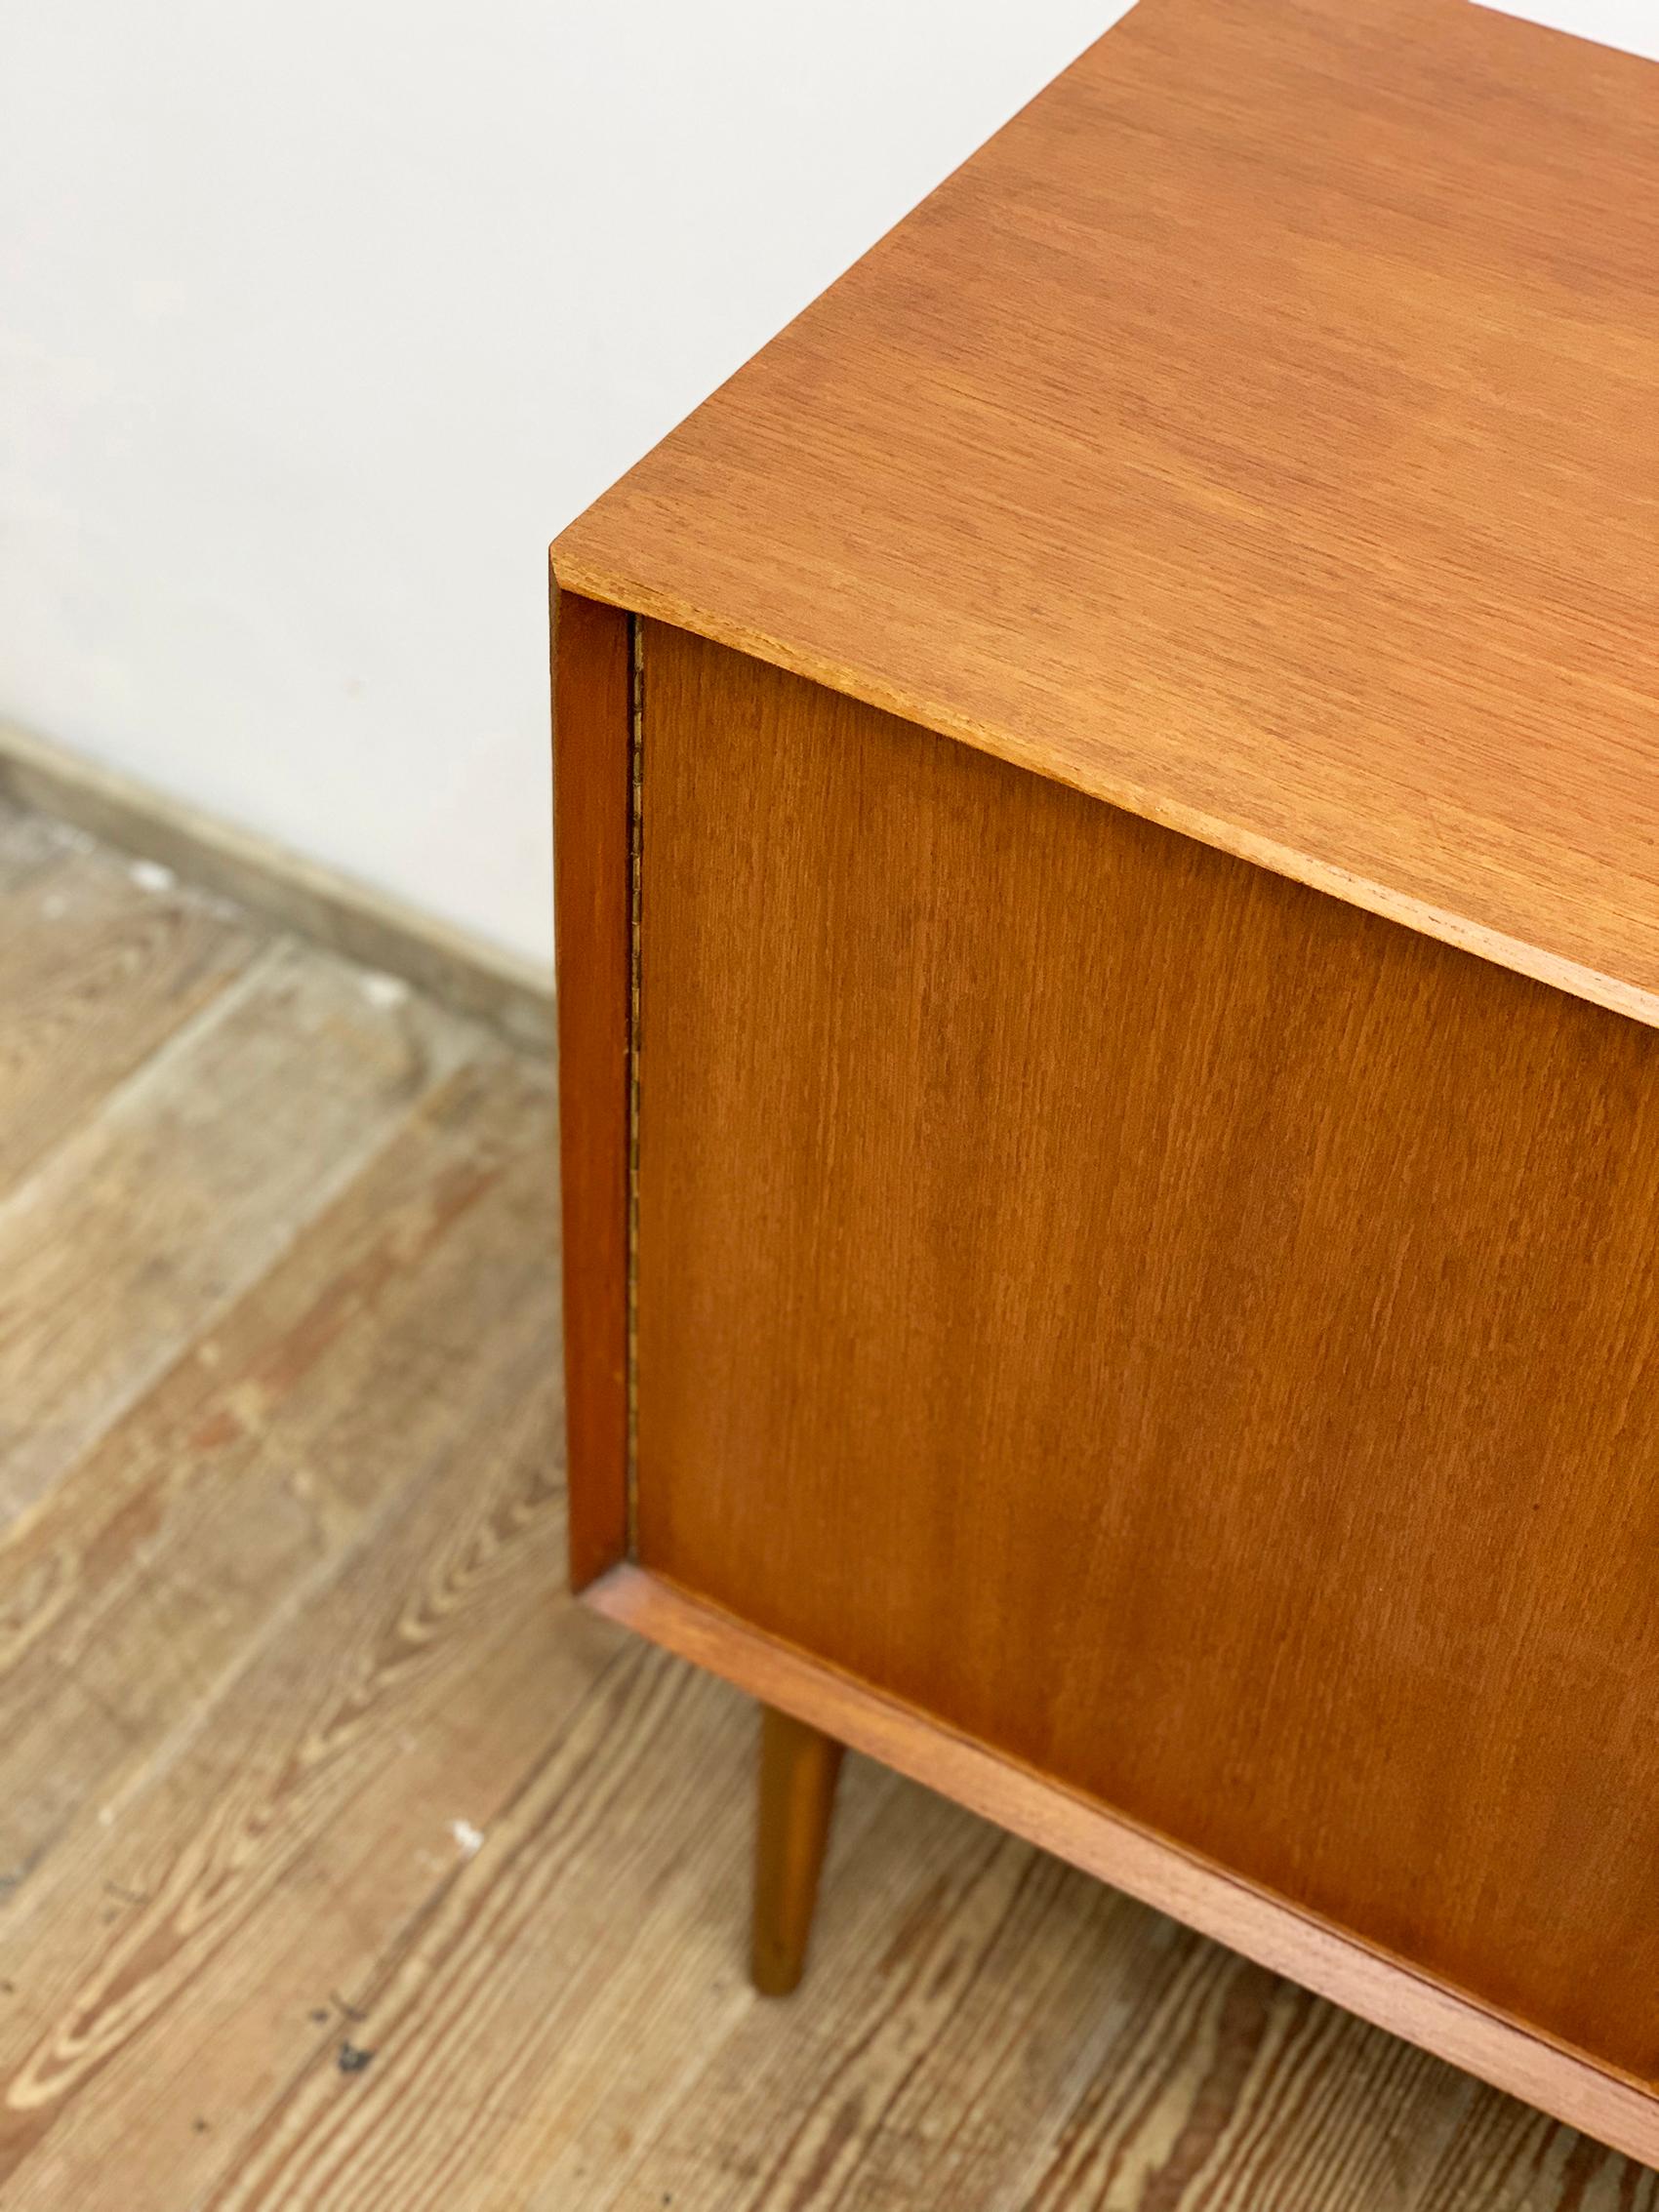 Small Mid-Century Sideboard in Teak by Rex Raab for Wilhelm Renz, Germany, 1960s For Sale 2